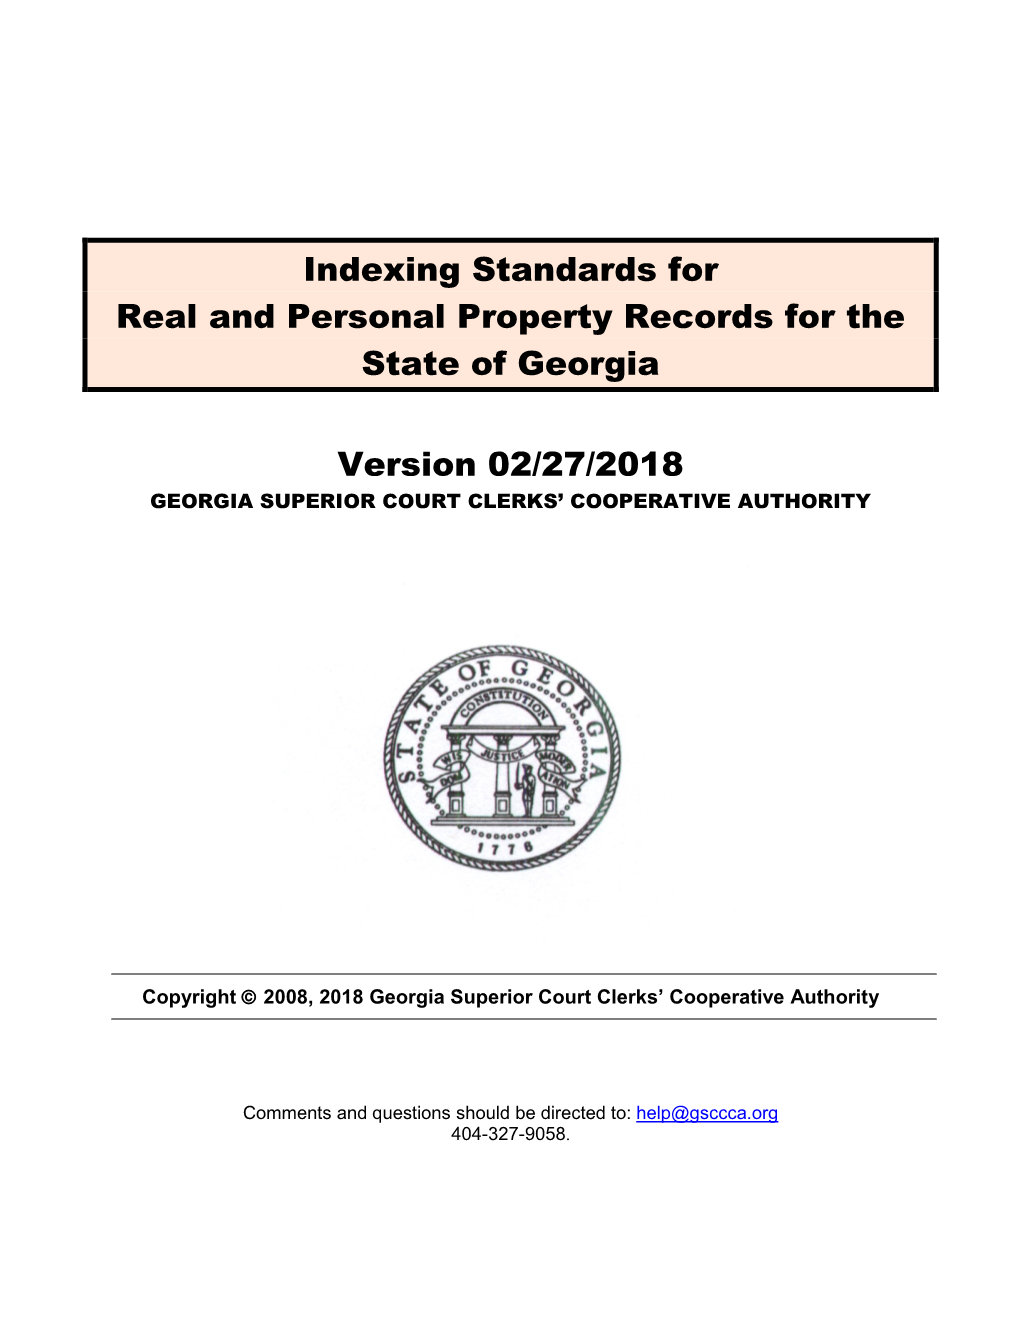 1.0 Indexing Standards for Real and Personal Property Records for The